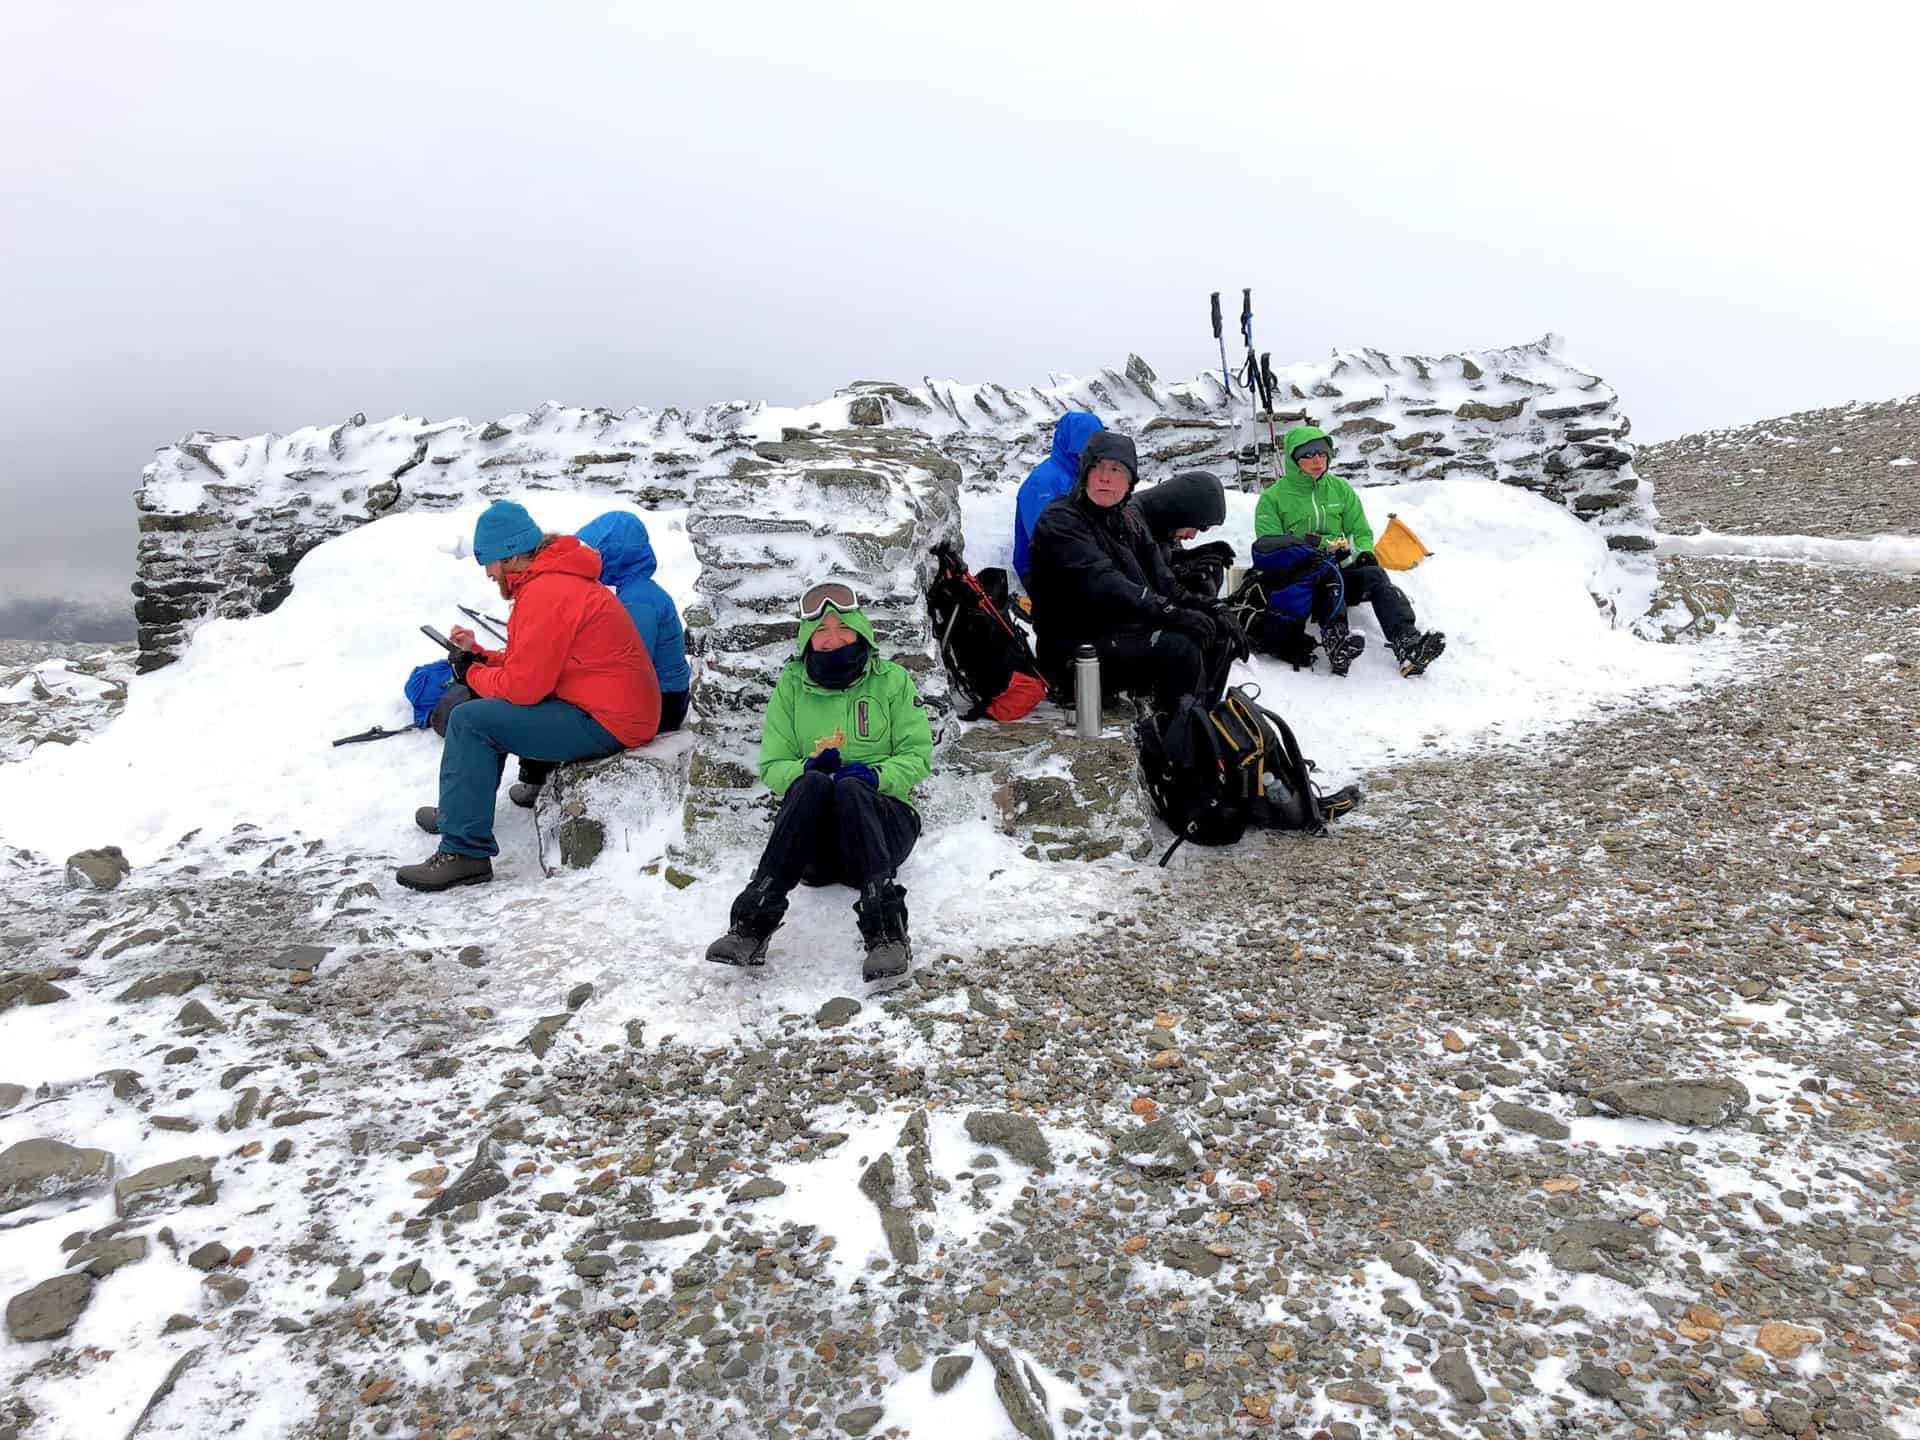 A well-deserved lunch break at Helvellyn's summit, basking in the success of our climb.